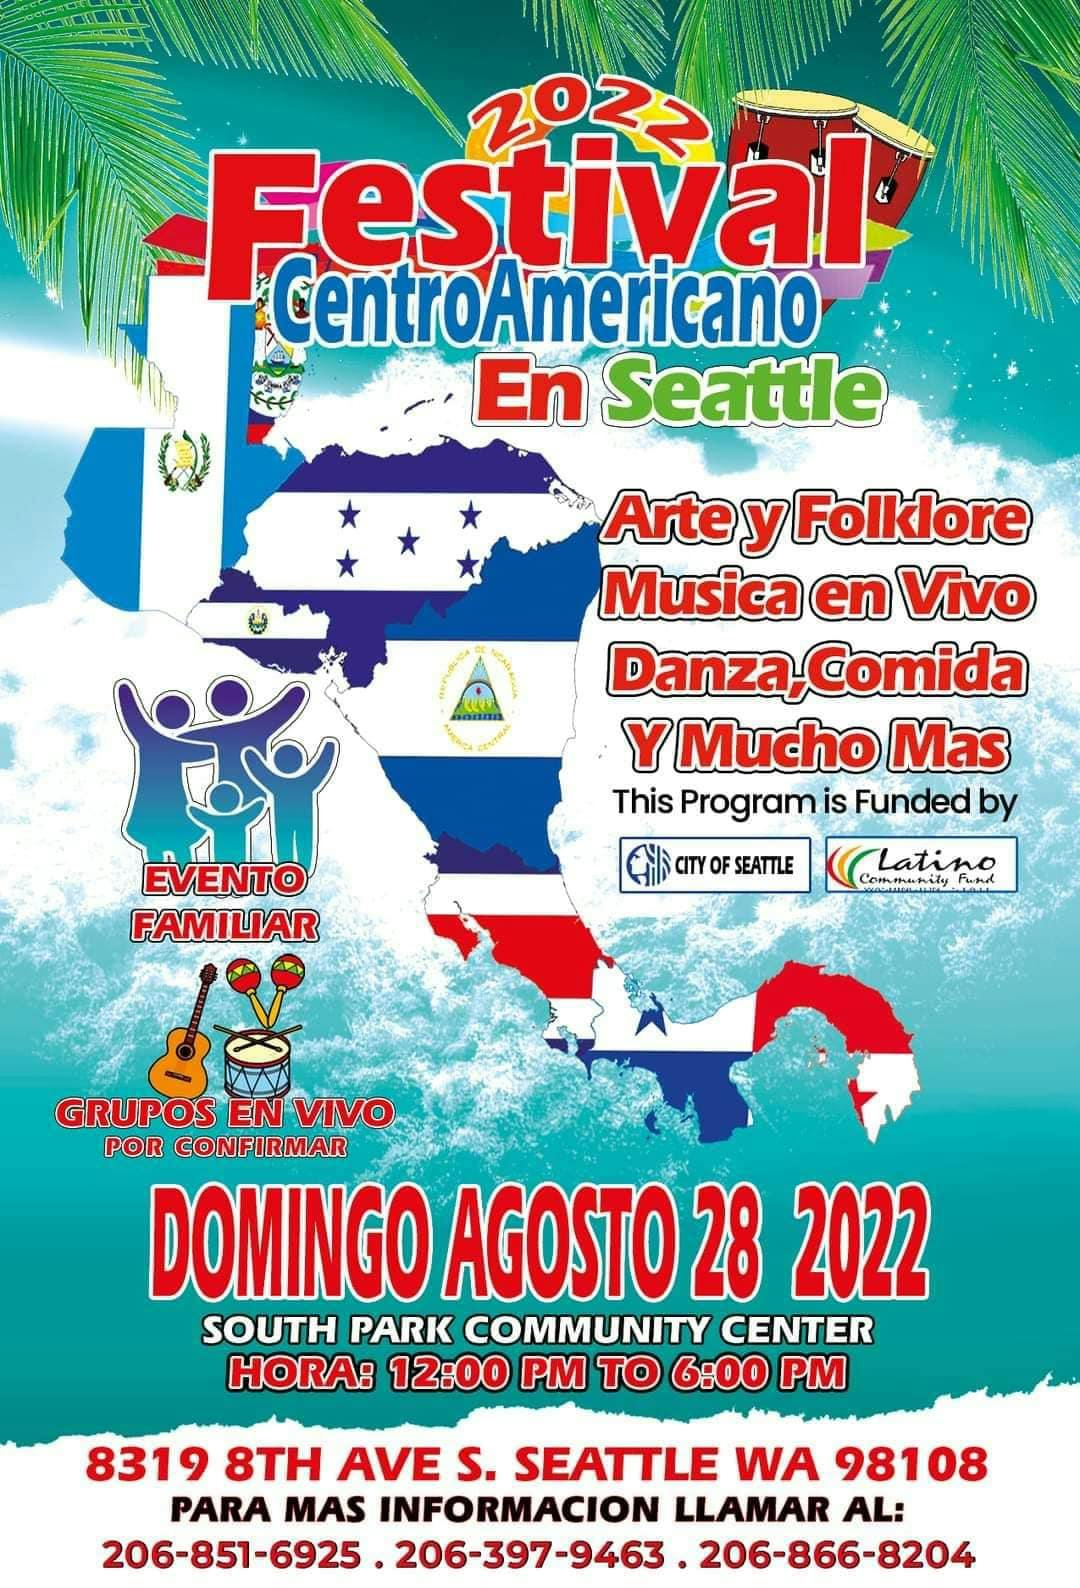 Poster for Central American Festival 2022